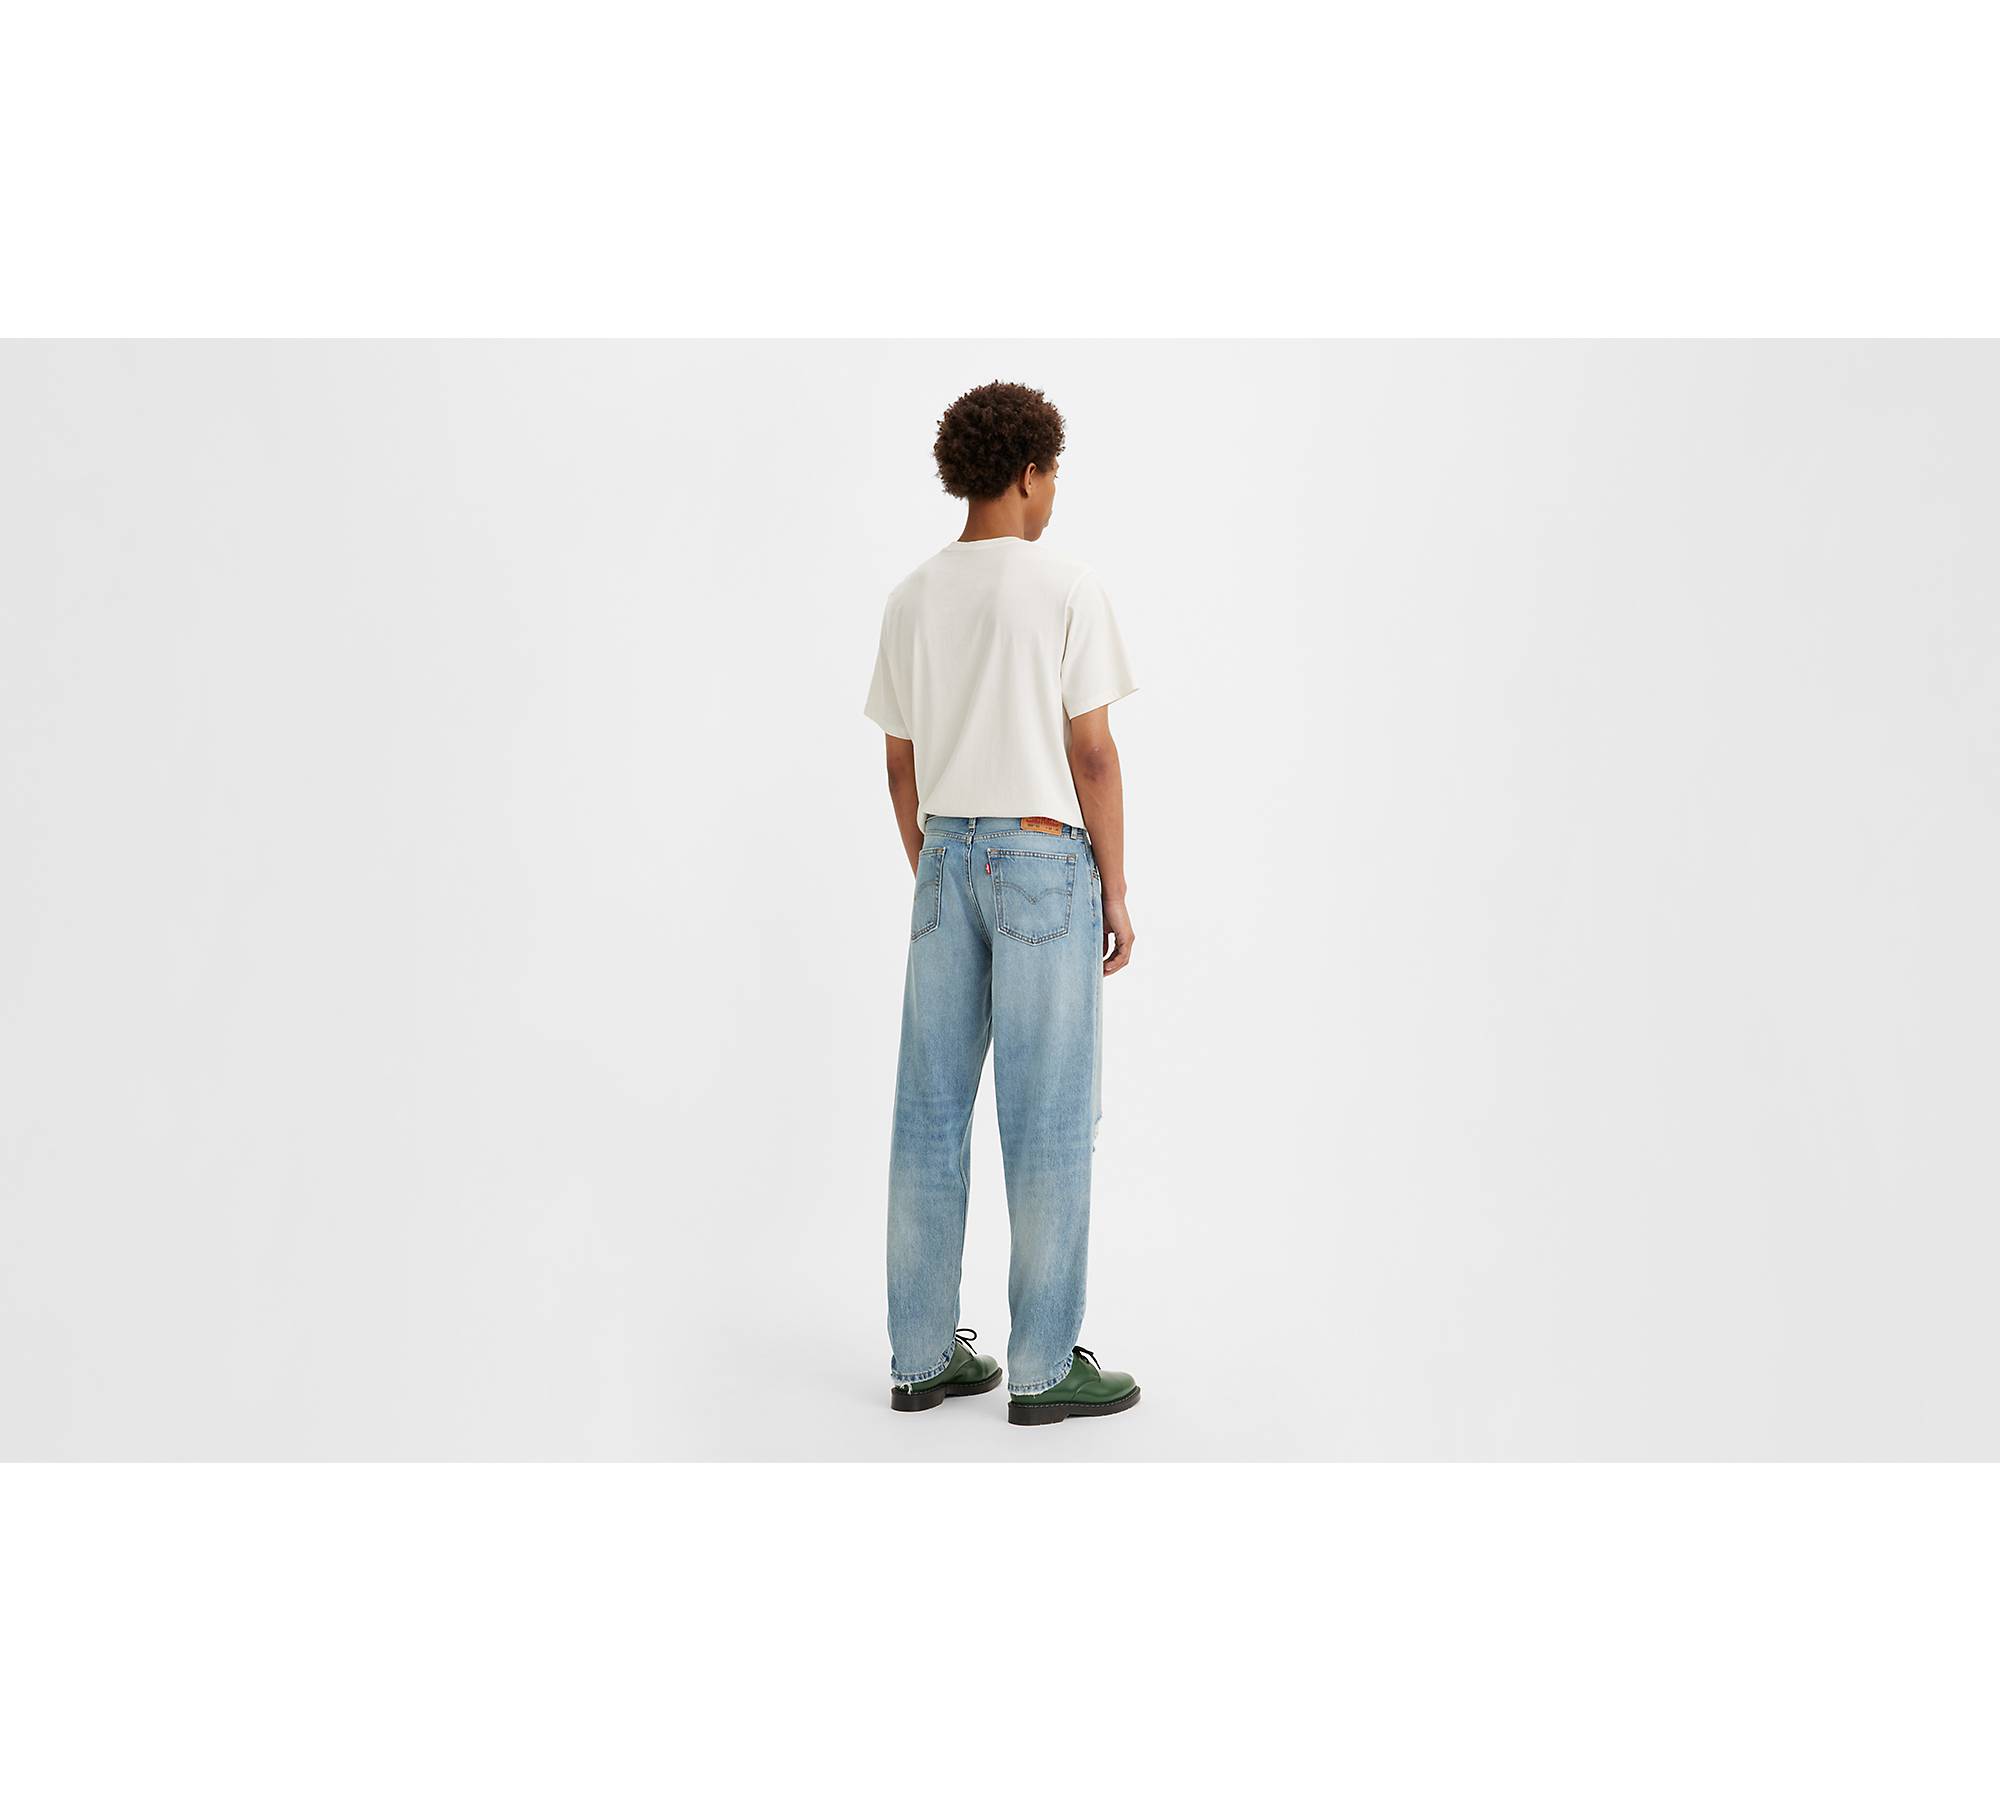 550™ '92 Relaxed Taper Fit Men's Jeans - Medium Wash | Levi's® US